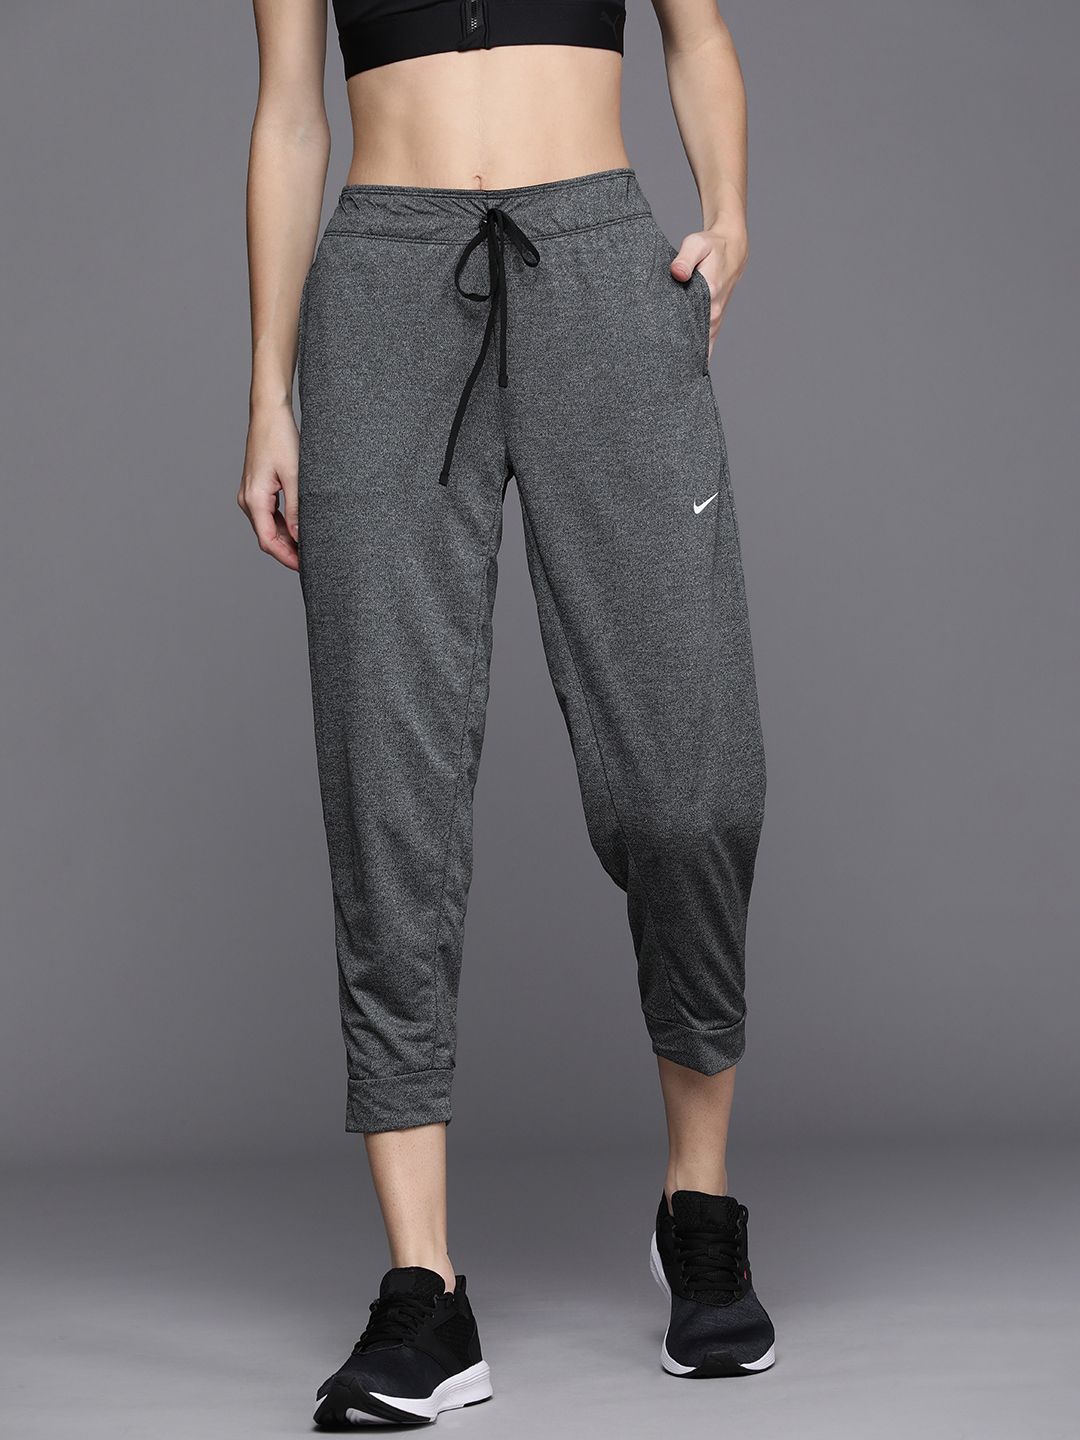 Nike Women Grey Solid Attack Dri-Fit Regular Fit 7/8 Training Track Pants Price in India